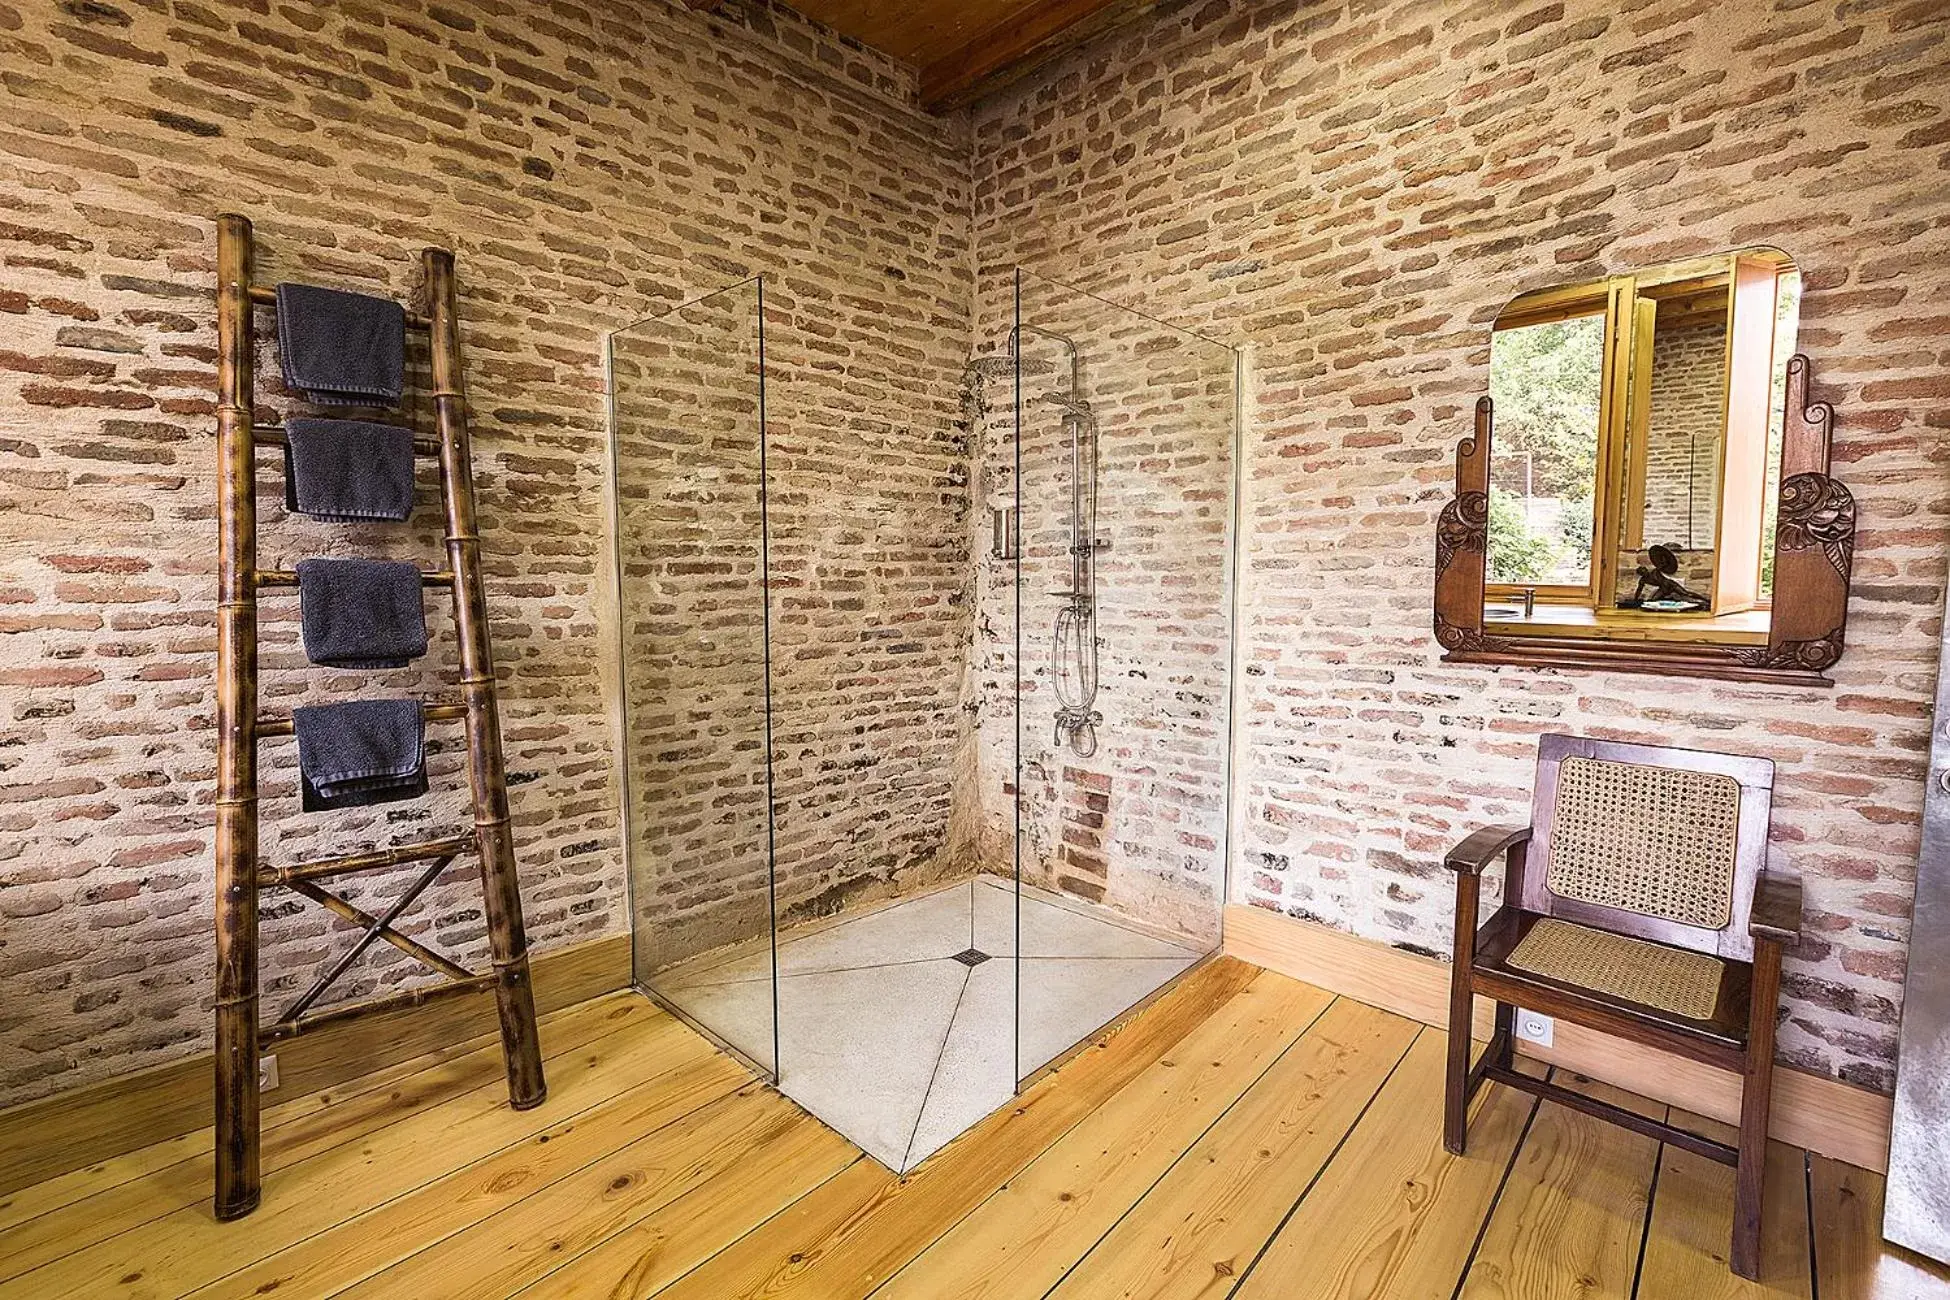 Shower in Castle in Old Town